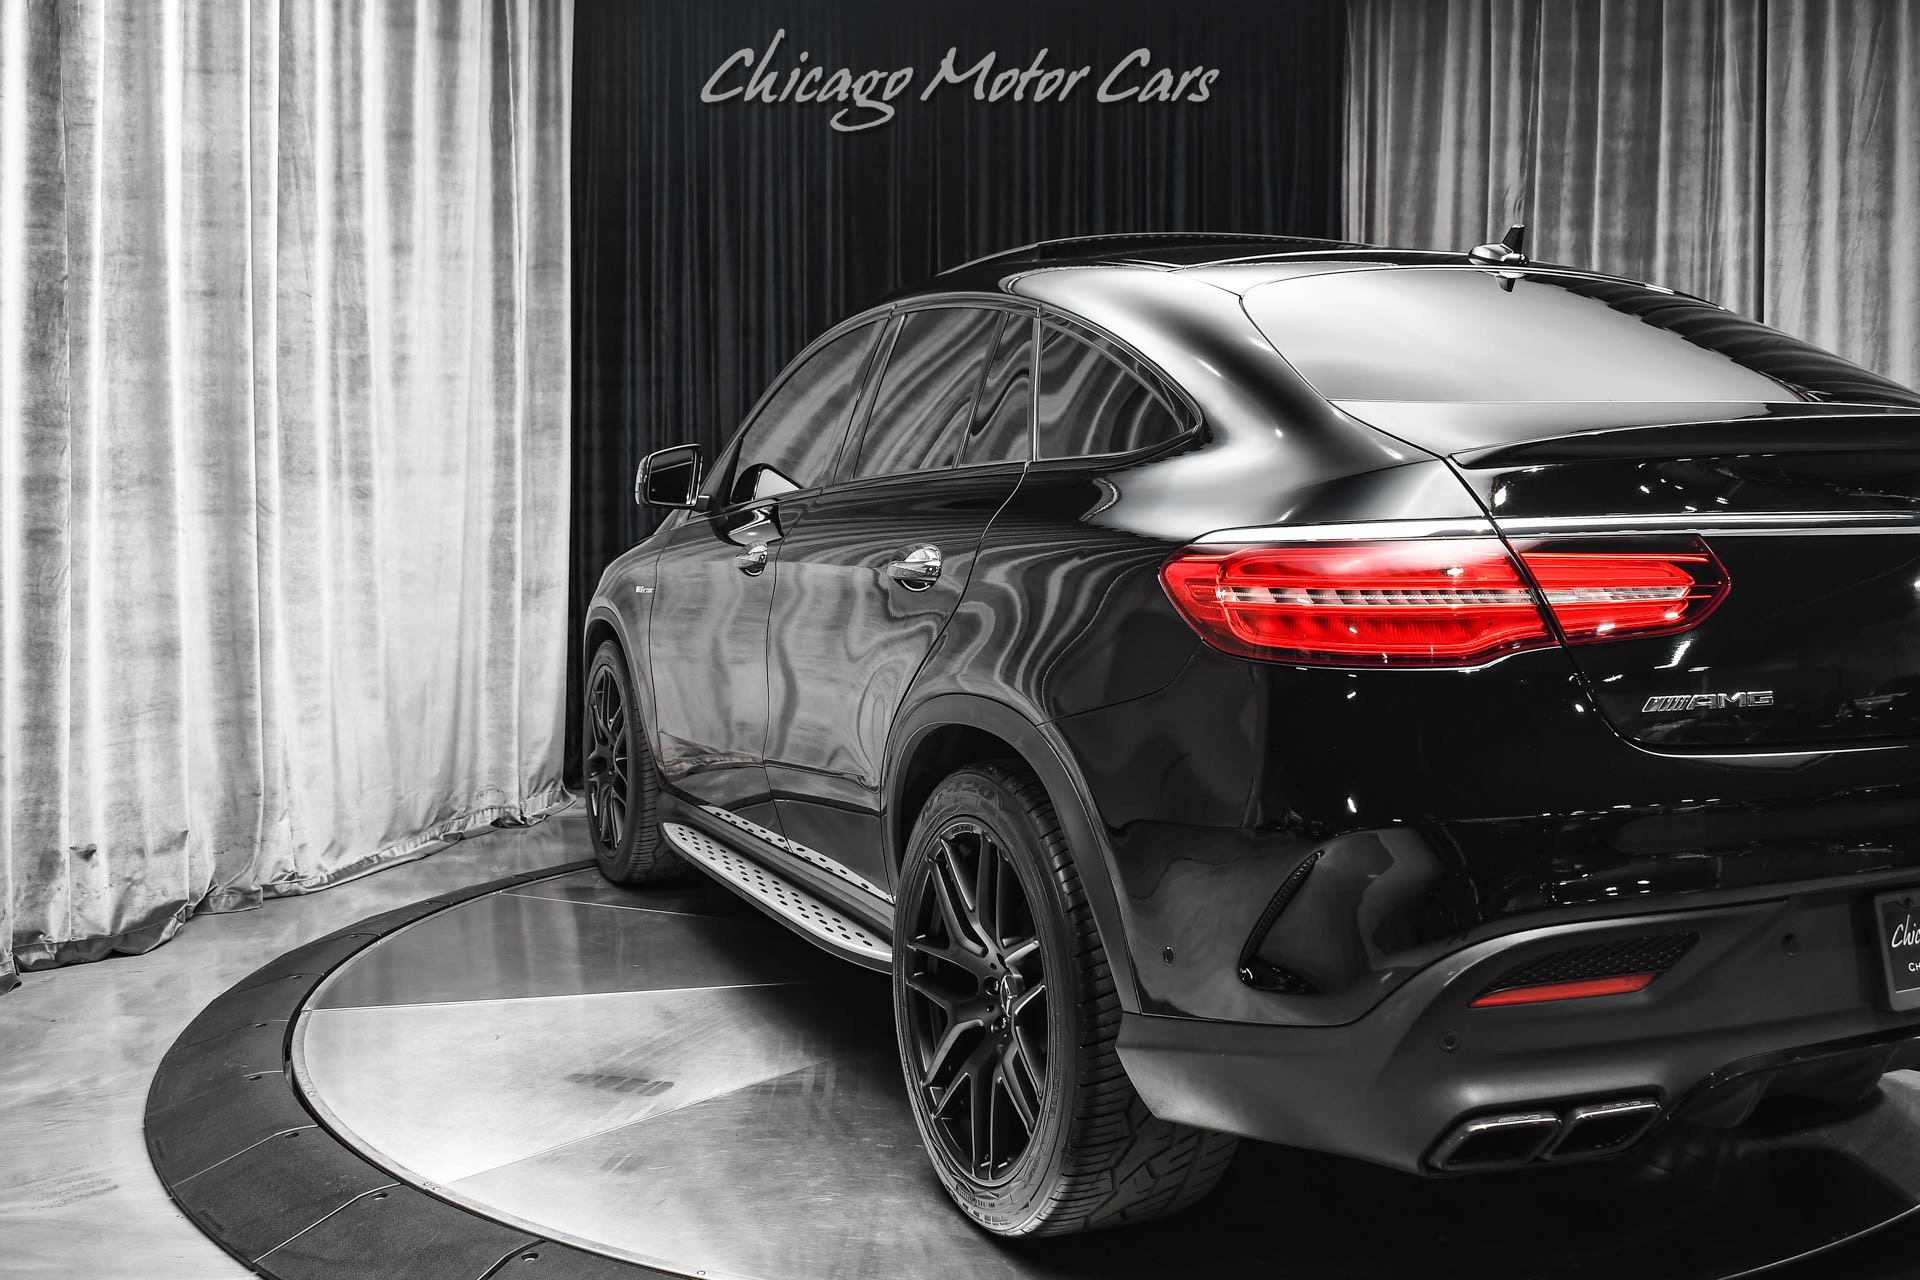 Used-2017-Mercedes-Benz-GLE63-AMG-S-4Matic-SUV-Premium-Pkg-Massage-Seats-Pano-Roof-Perf-Exhaust-LOADED